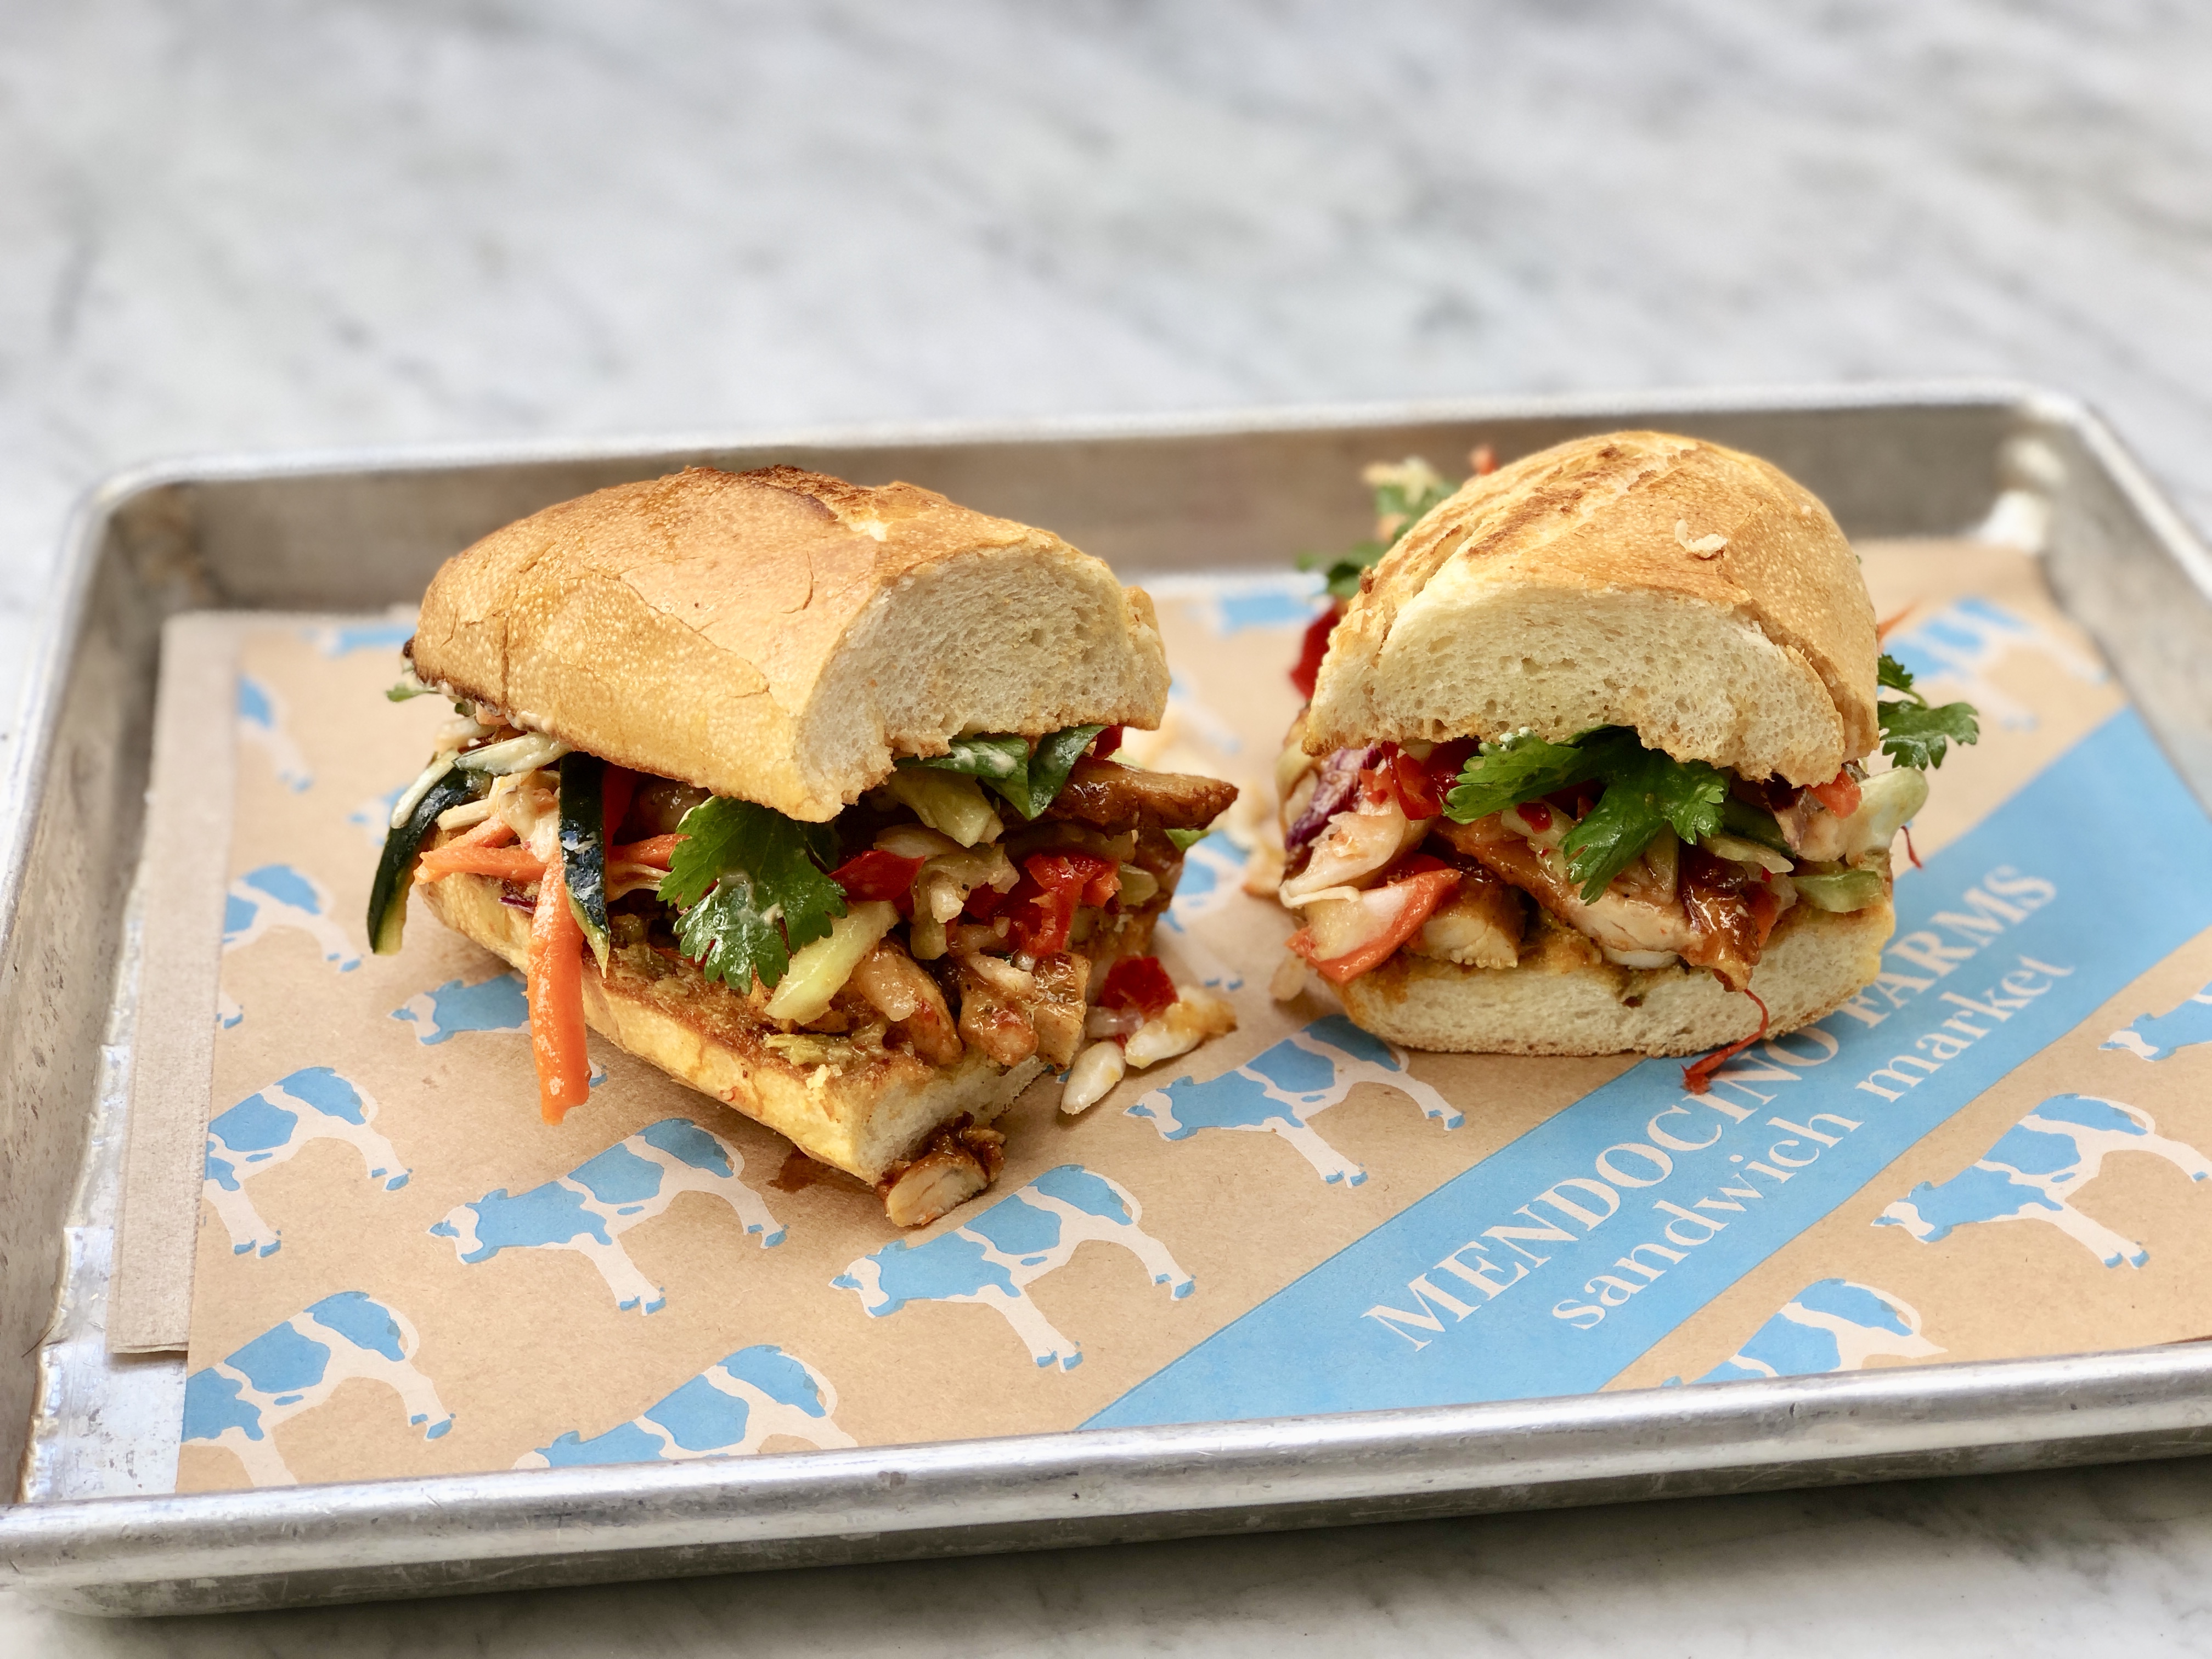 Sandwiches for Schools - WITH UPDATE! - Mendocino Farms